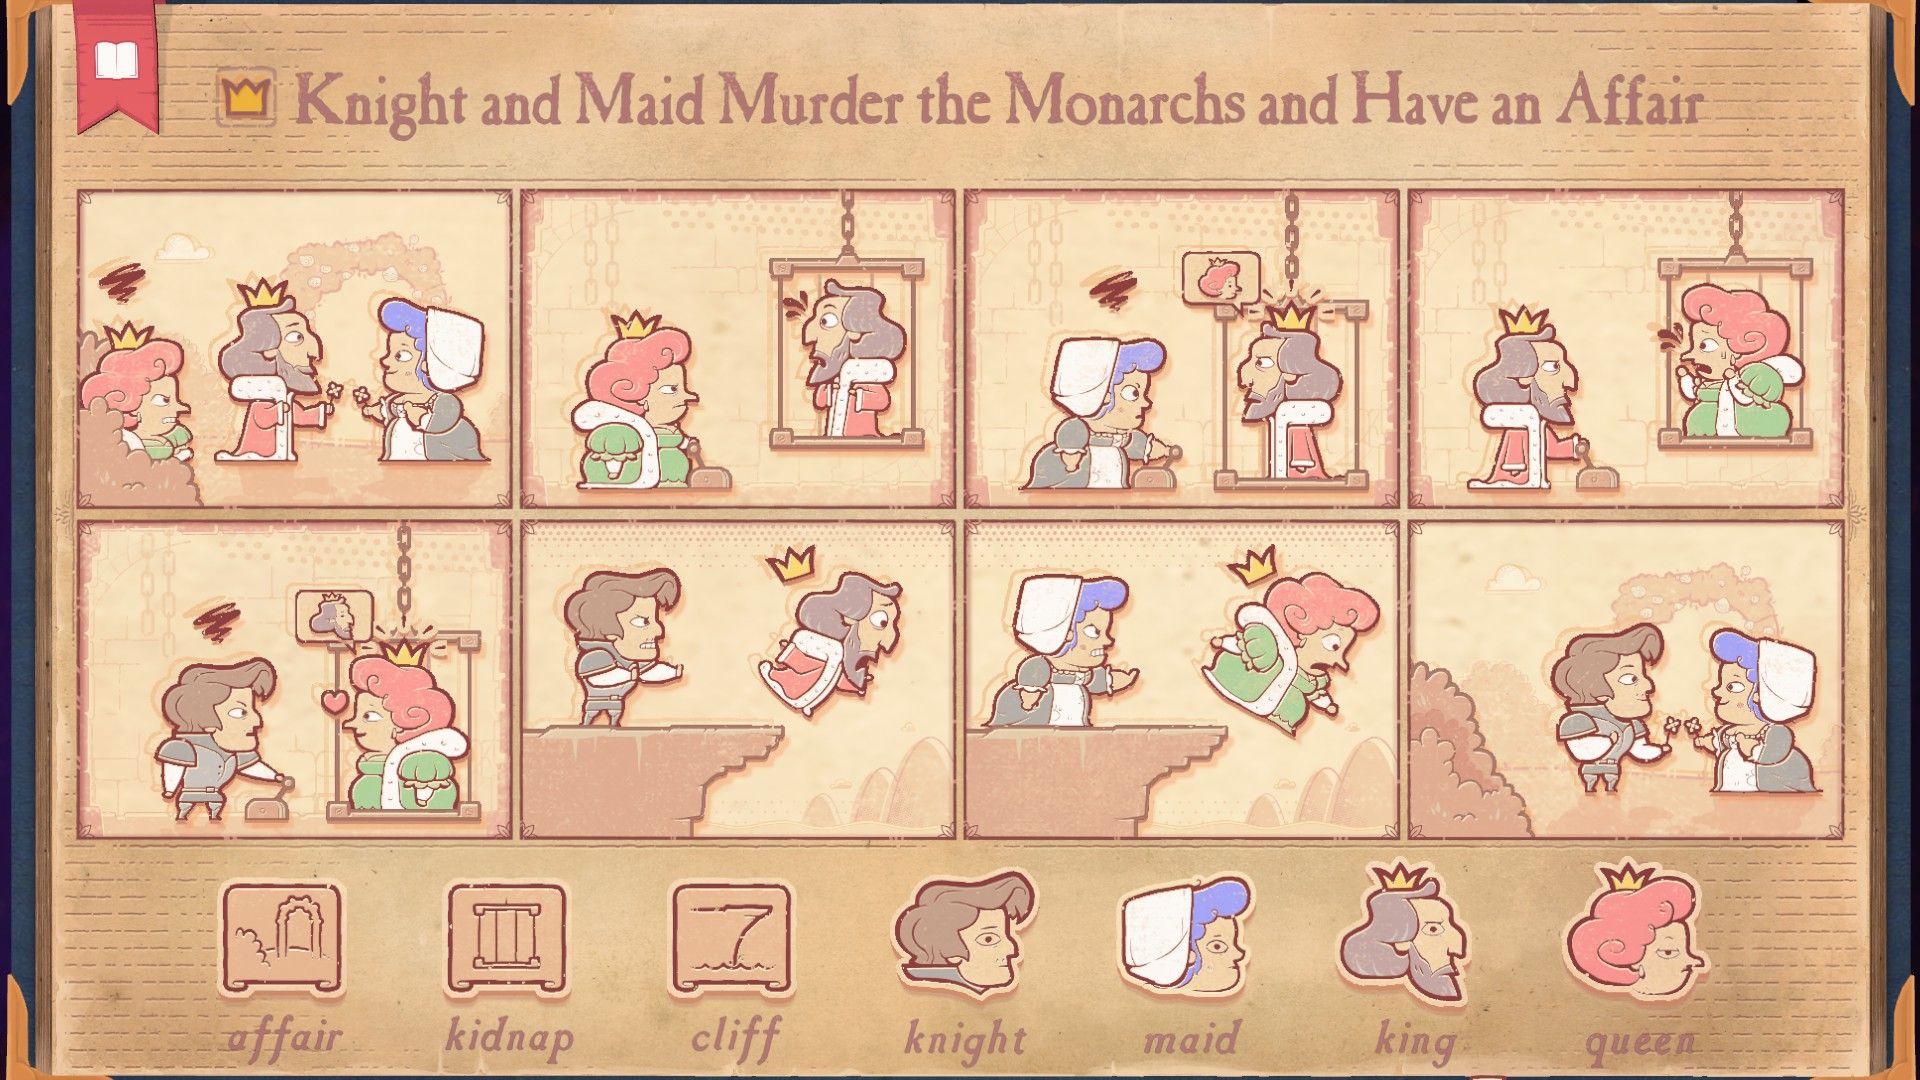 The solution for the Love Revolution section in Storyteller, showing the Knight and Mmaid murdering the monarchs.